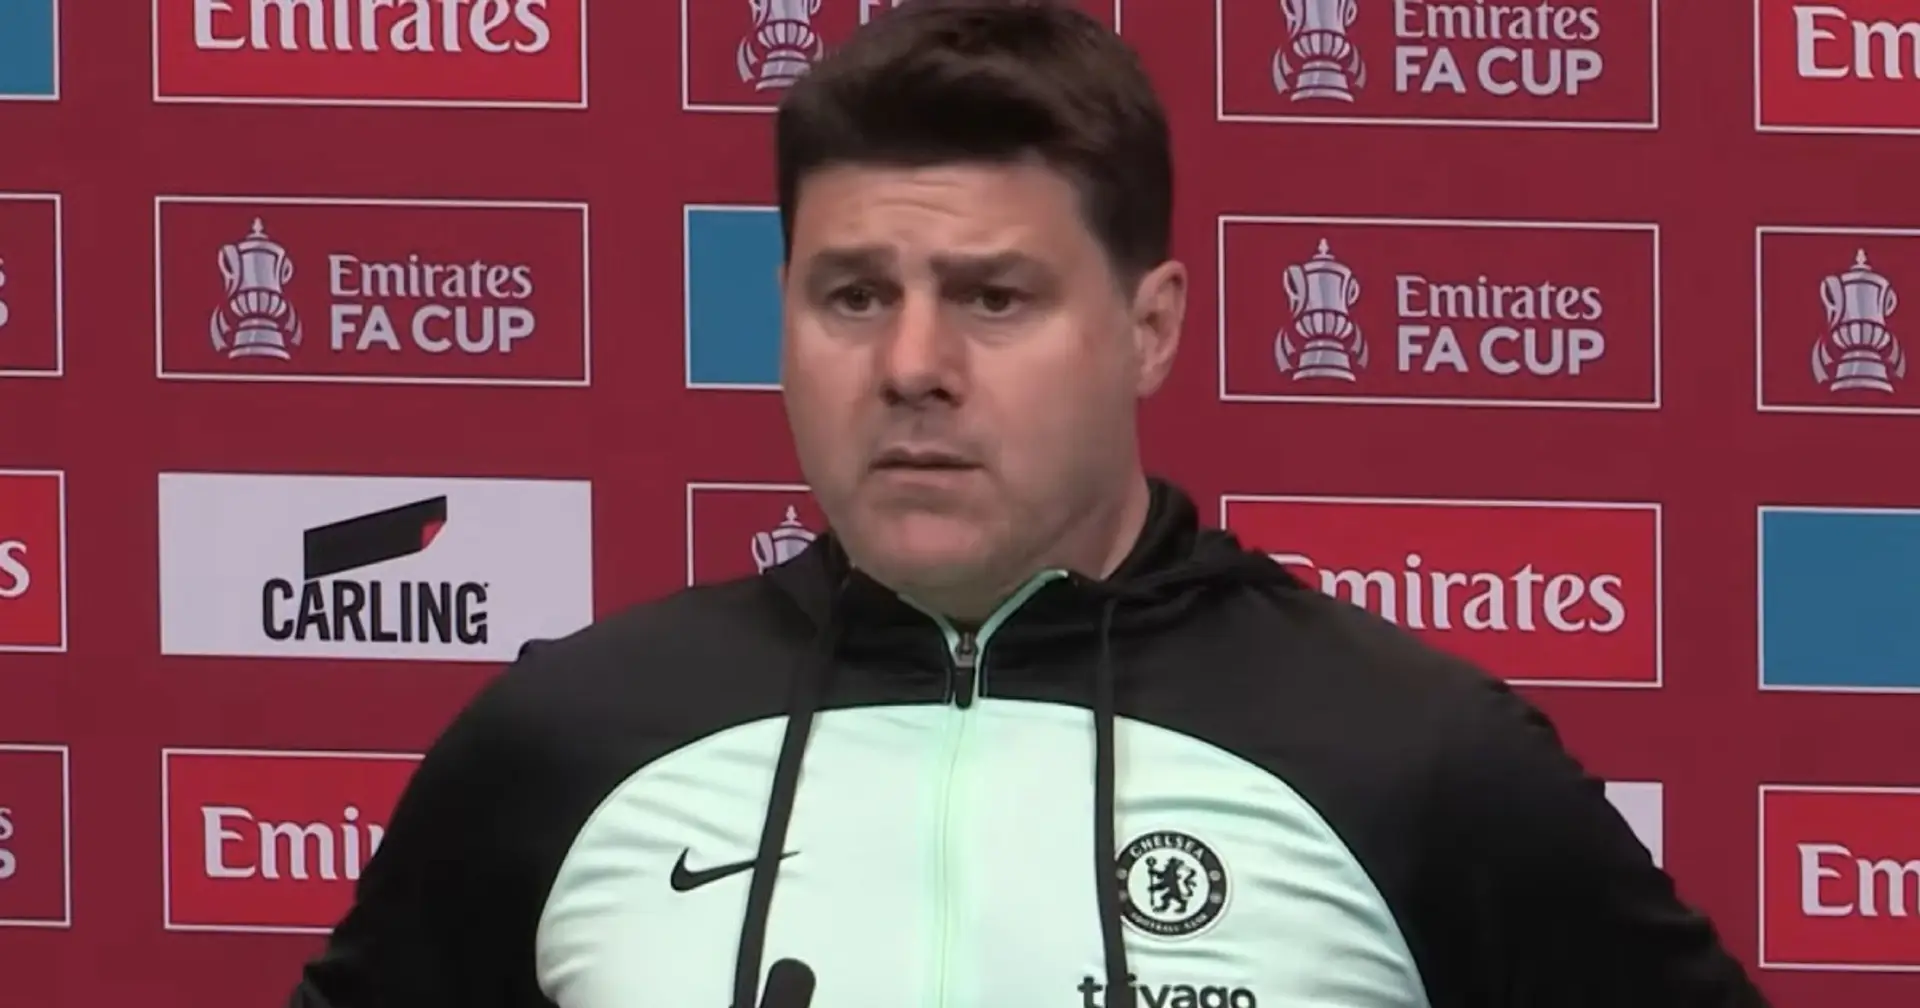 'It looks like only I need to improve': Pochettino urges players to take responsibility for Chelsea problems